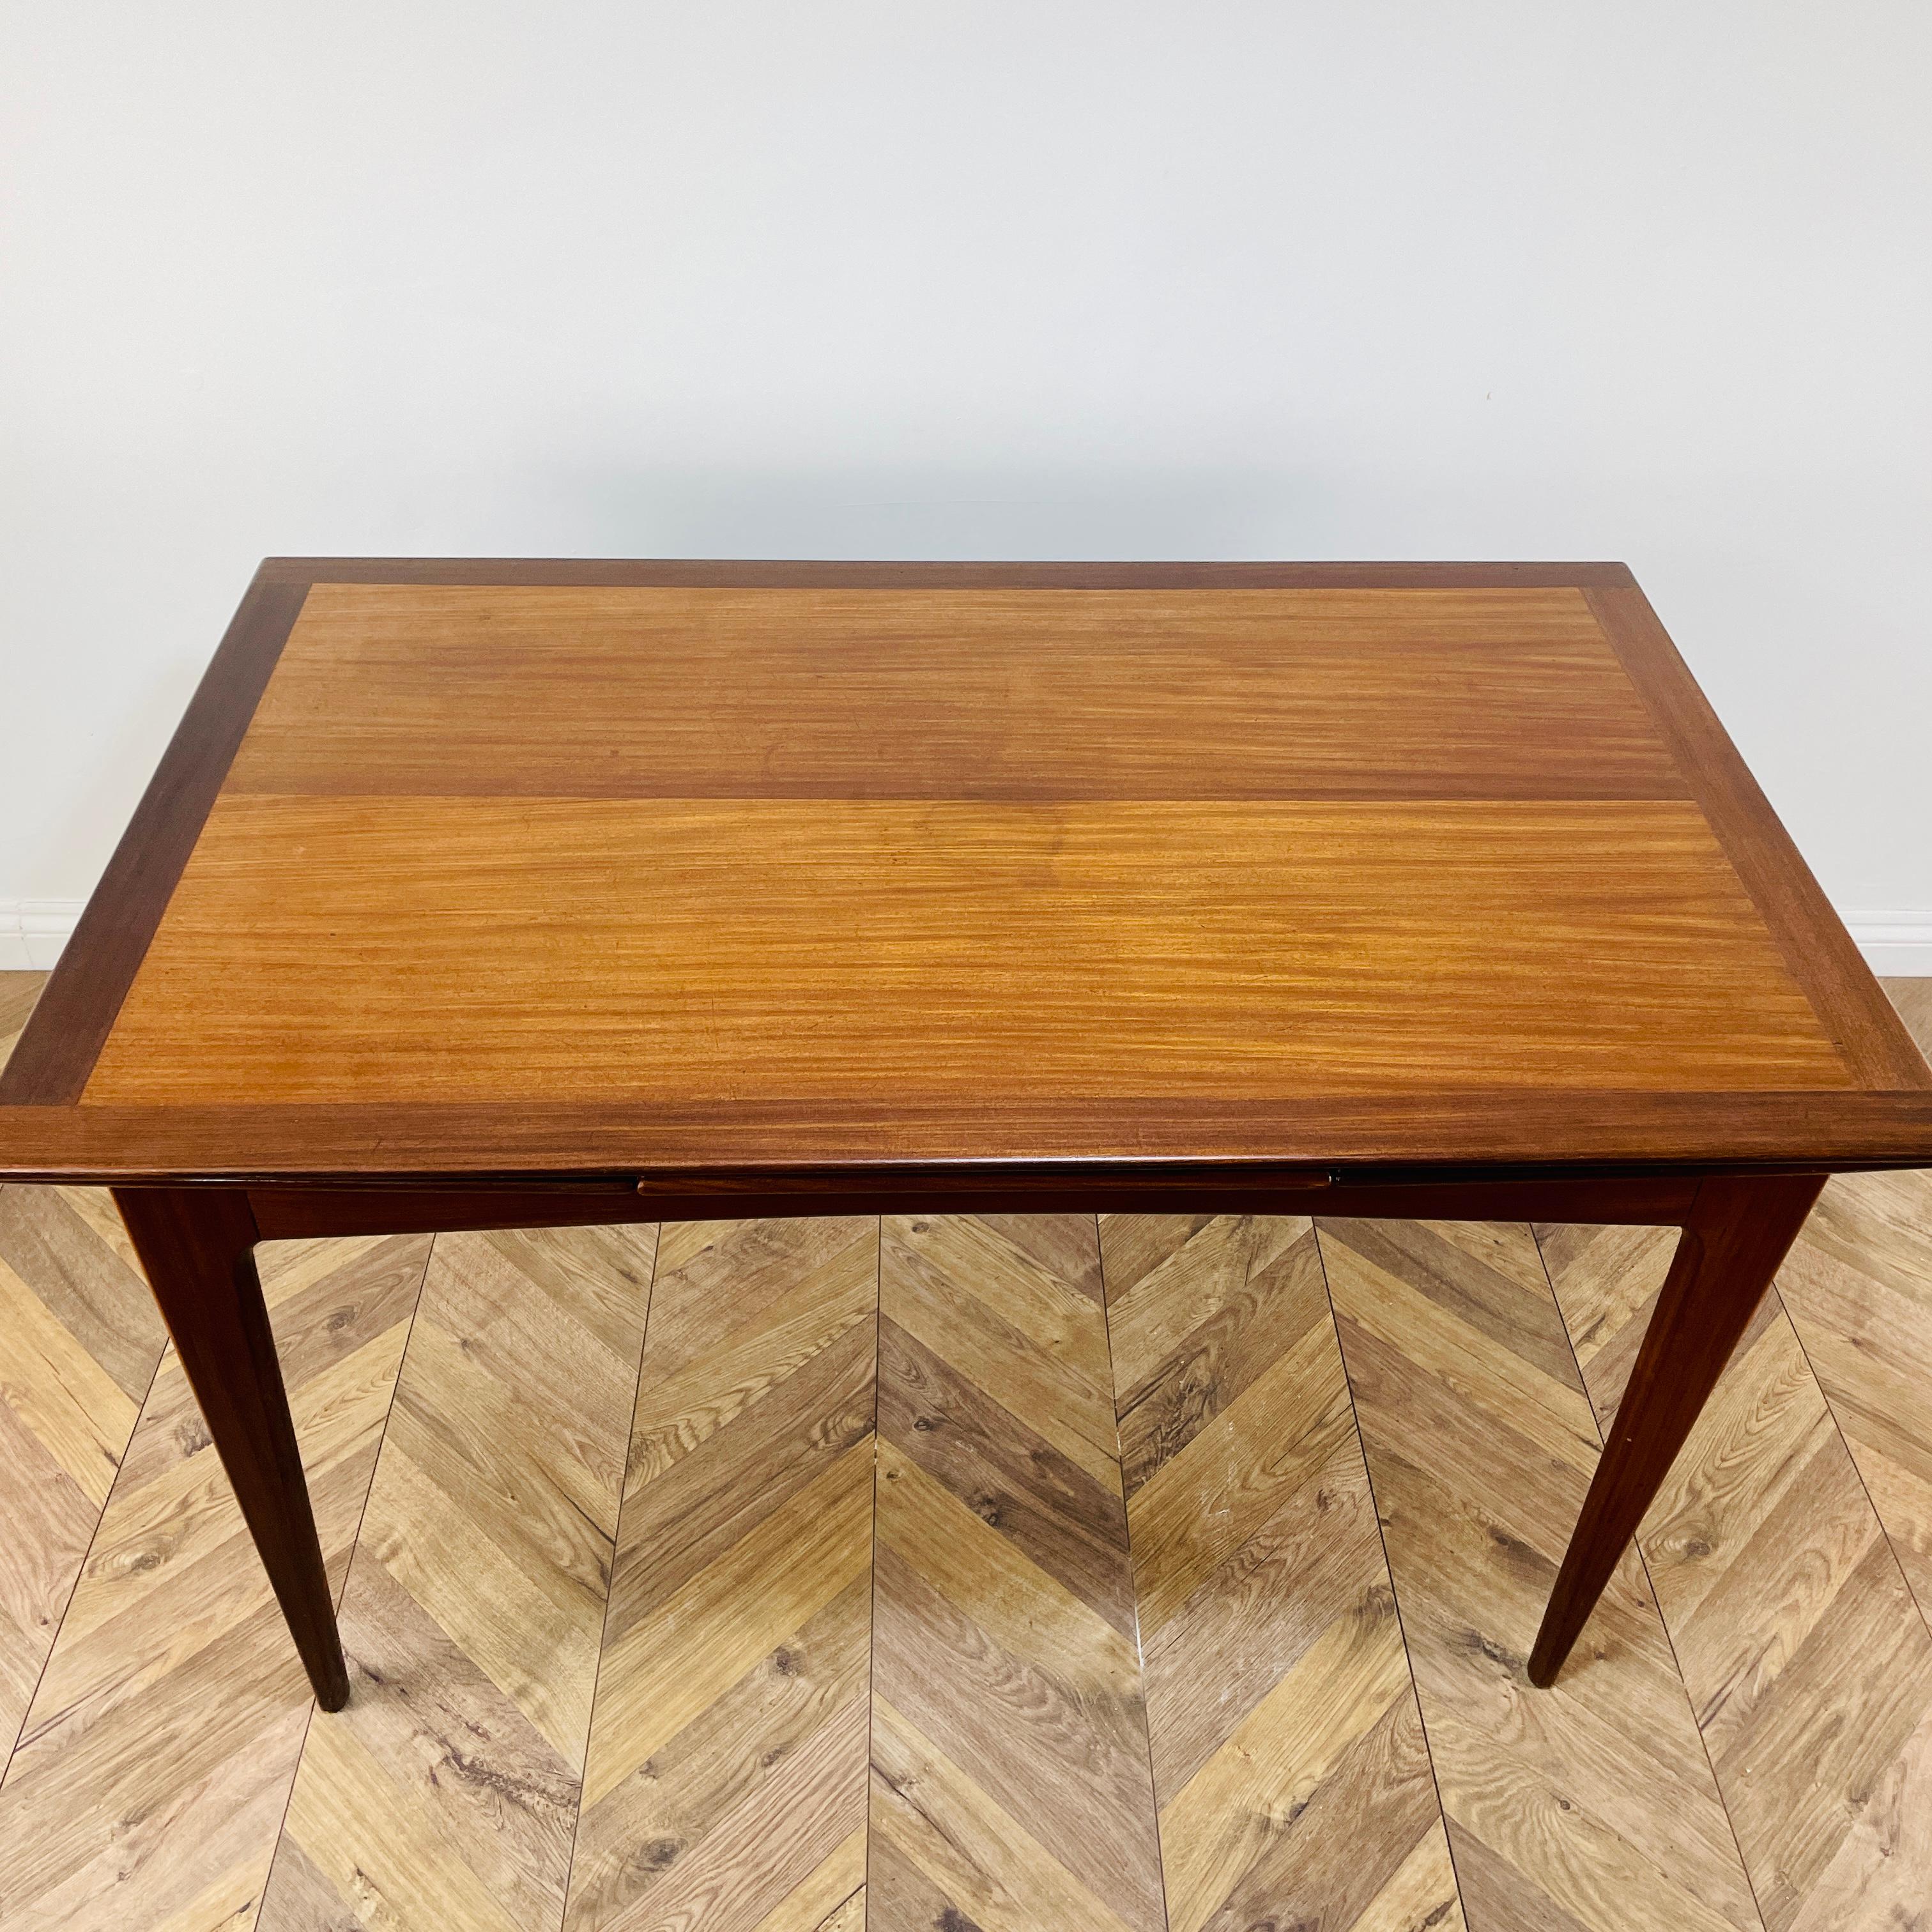 Mid-Century Extending Dining, Made in Denmark, circa 1960s.

A beautifully designed table made from teak, with extending leaves, which are concealed underneath.

The table boasts bullet edges and is in very good vintage condition, with only light